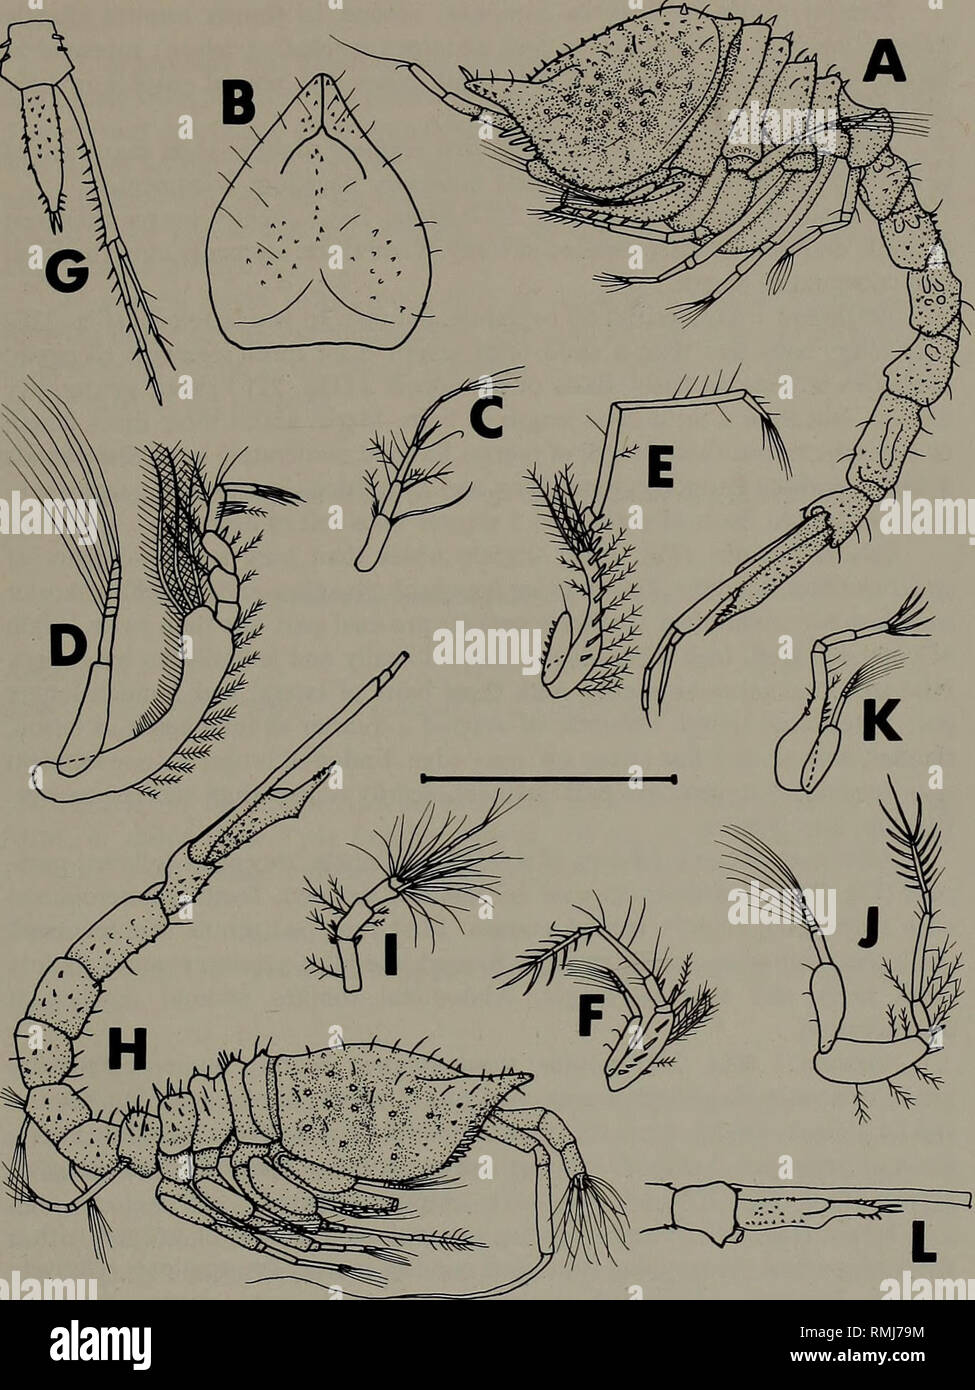 . Annals of the South African Museum = Annale van die Suid-Afrikaanse Museum. Natural history. SOUTHERN AFRICAN CUMACEA: PART 4. Fig. 22. Makrokylindrus acanthodes. Ovigerous female. A. Lateral view. B. Dorsal view of carapace. C. Antenna 1. D. Maxilli- ped 3. E. Pereiopod 1 of young female. F. Pereiopod 2. G. Uropod and telson. Adult male. H. Lateral view. I. Antenna 1. J. Pereiopod 2. K. Pereiopod 3. L. Telson and peduncle of uropod. Scale line = 2 mm for A-B, H; 1 mm for C-G, I-L.. Please note that these images are extracted from scanned page images that may have been digitally enhanced for Stock Photo